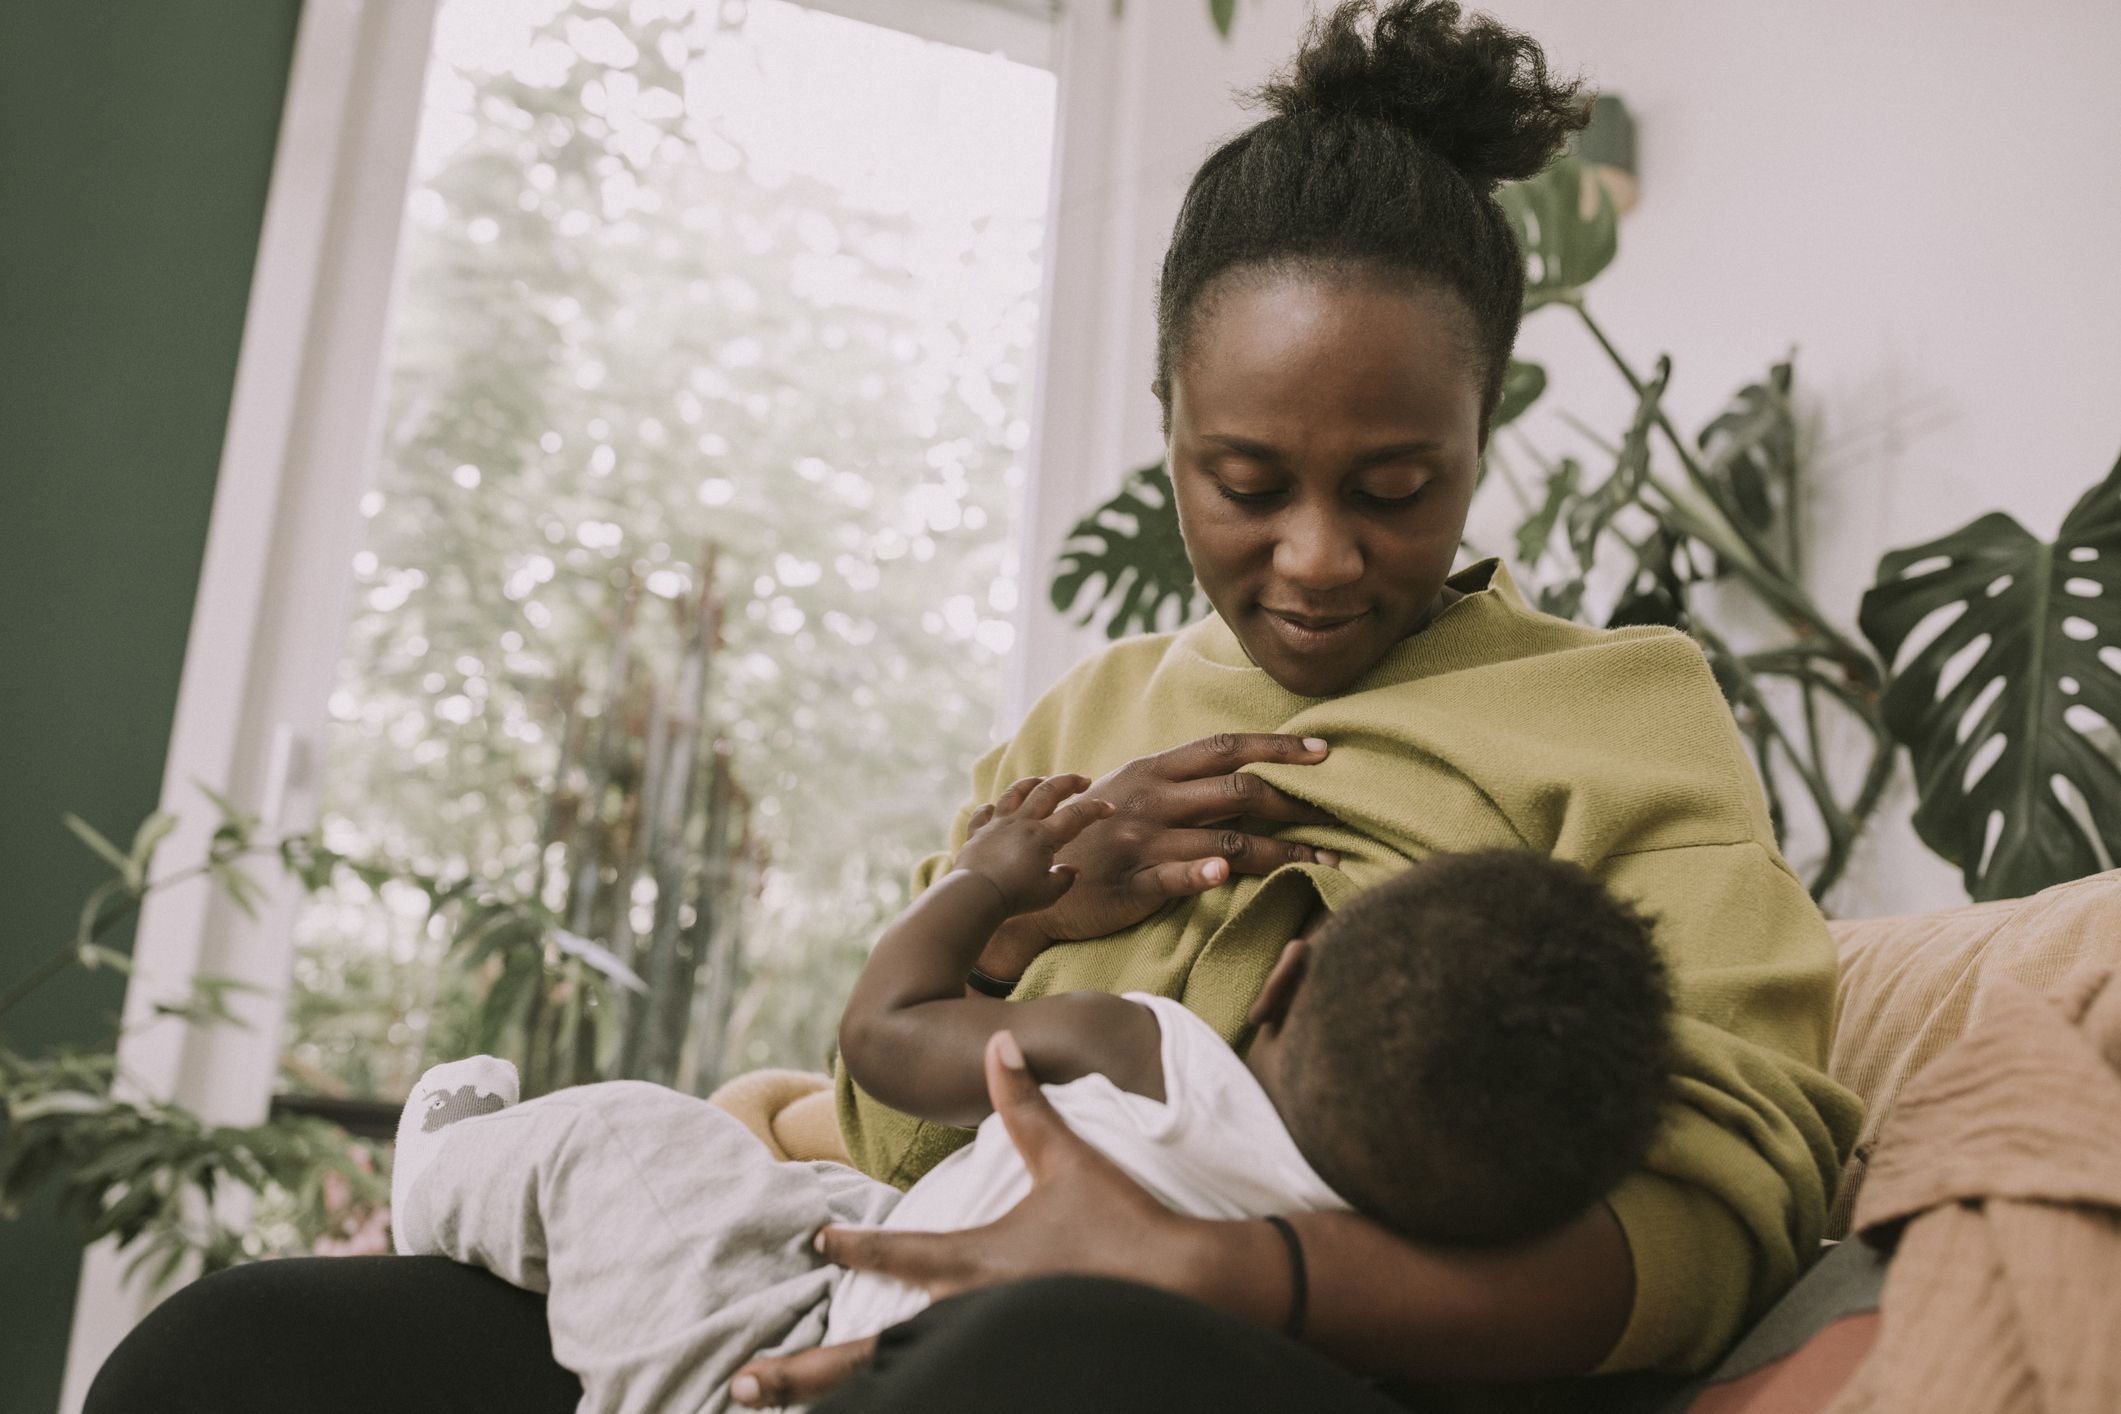 UNICEF on X: By supporting more mothers to breastfeed within the